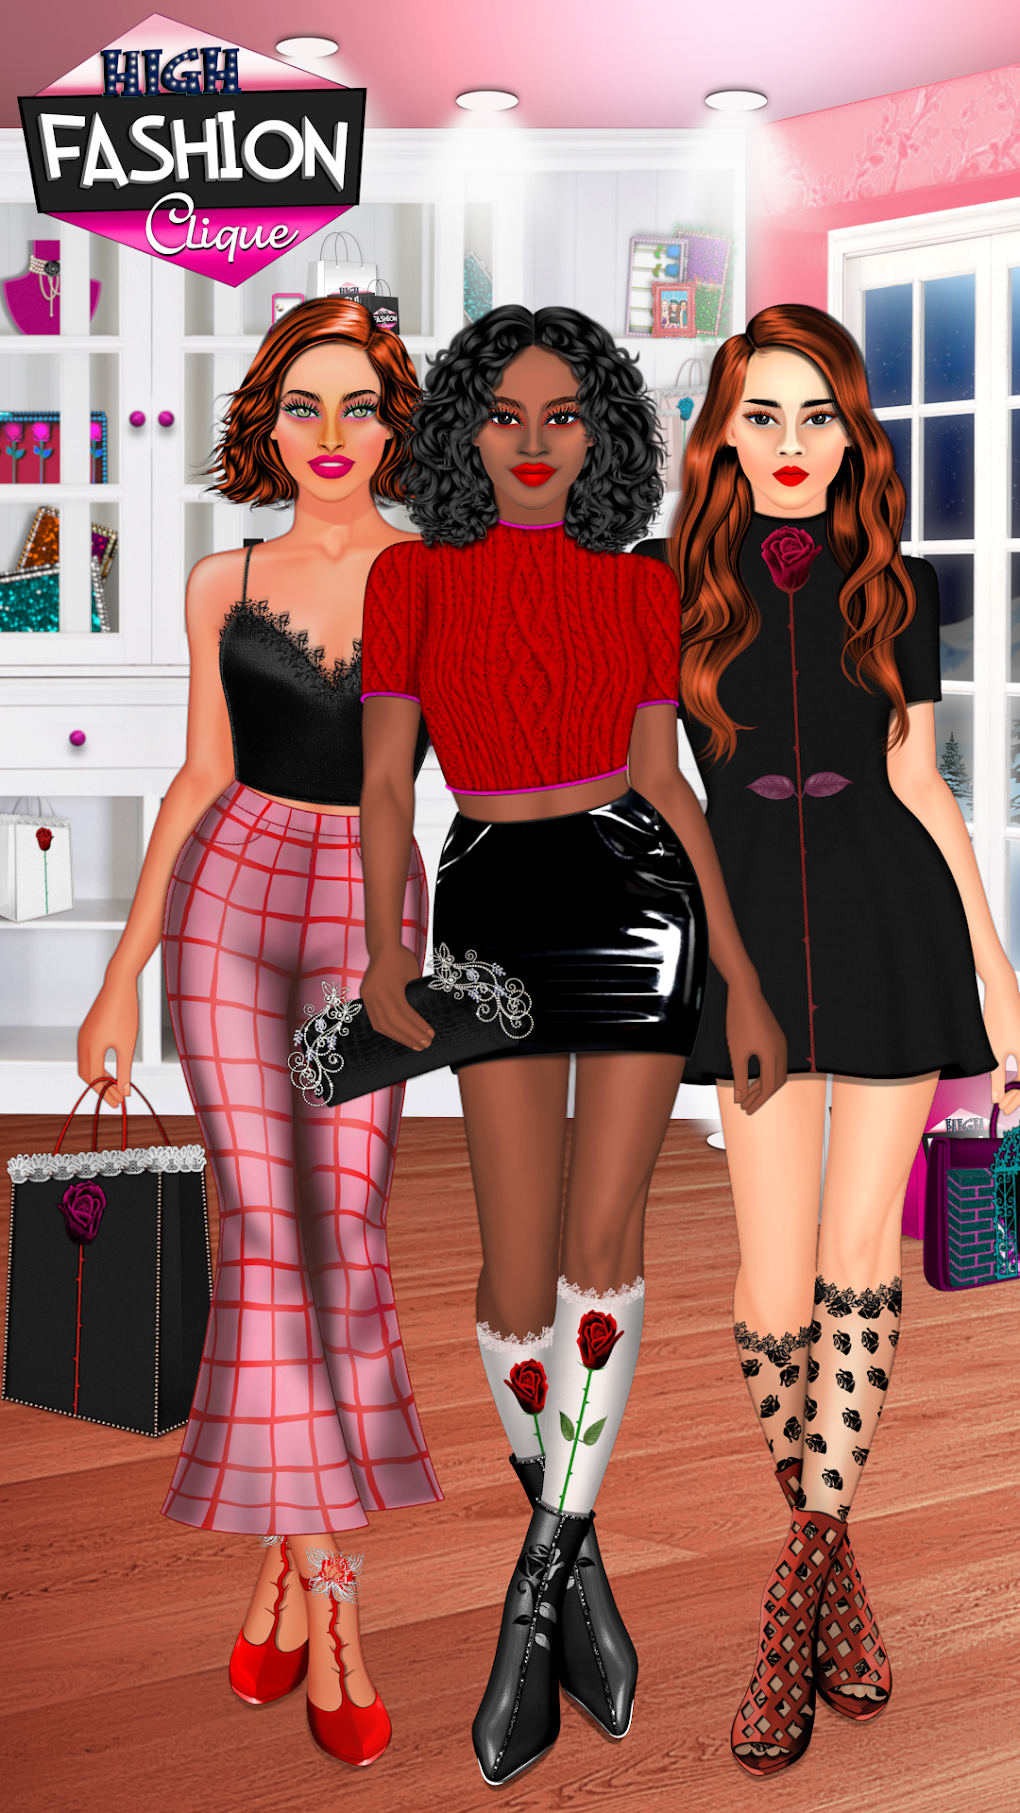 High Fashion Clique - Dress up Makeup Game for Android - Download